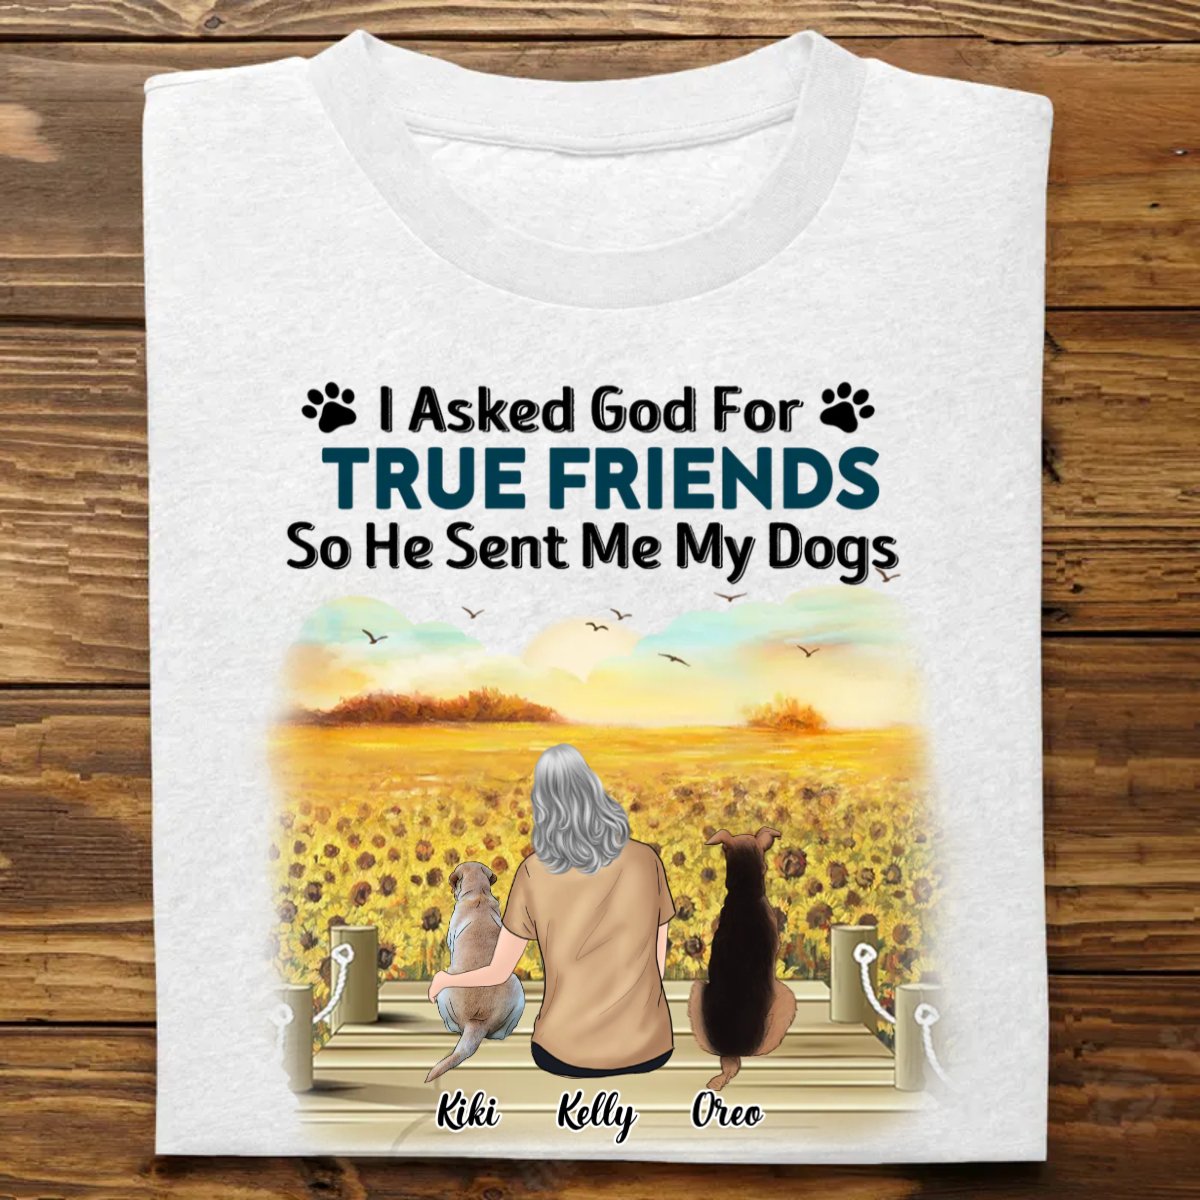 Dog Lovers - I Asked God For A True Friend - Personalized Unisex T - shirt, Hoodie, Sweatshirt - The Next Custom Gift